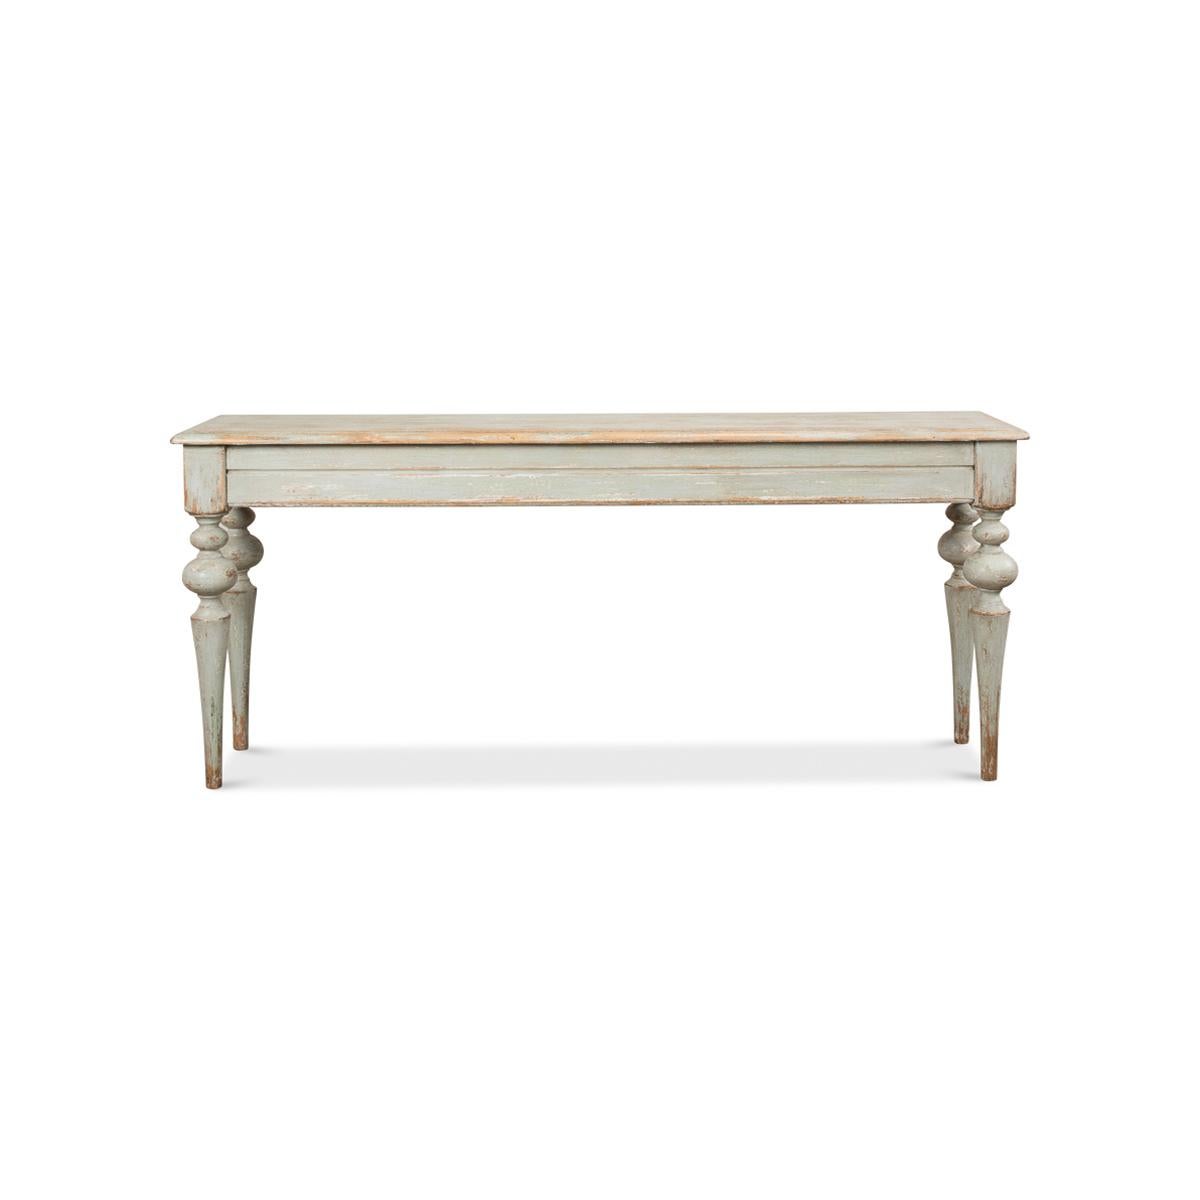 Introducing the charming Rustic provincial sage pine console table, a beautifully crafted piece of furniture that exudes sophistication and rustic elegance. Finished in a rustic antiqued painted sage green. Its molded edge top is a standout feature,